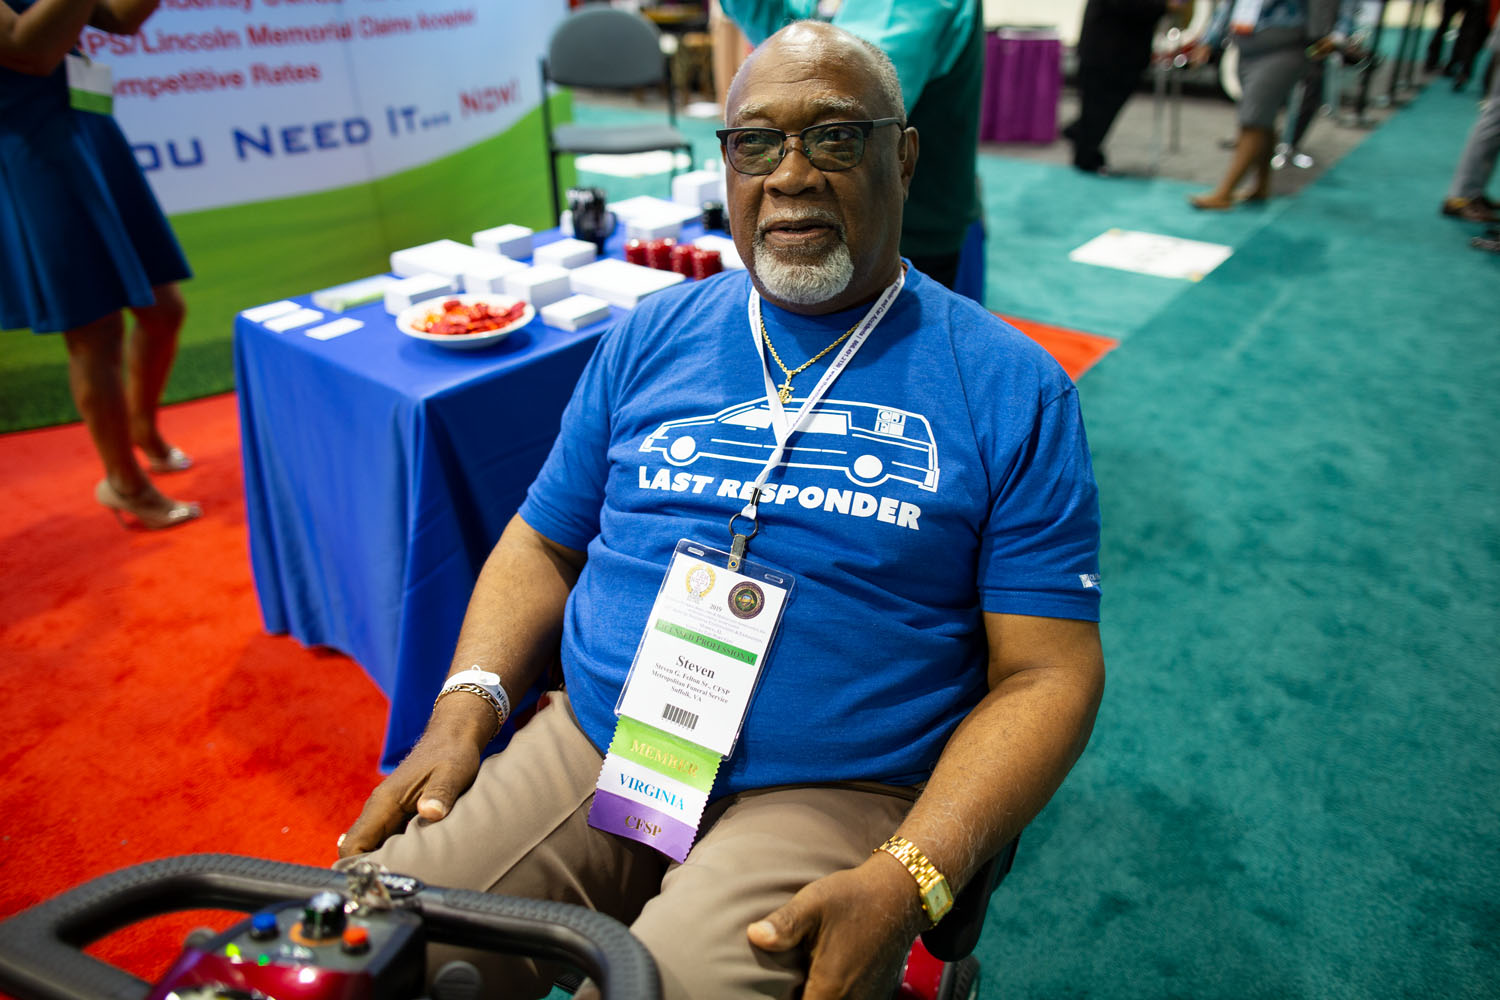 Funeral-service professional Steven G. Felton Sr. at NFDMA’s National Convention and Exposition. Mobile, AL, August 2019.